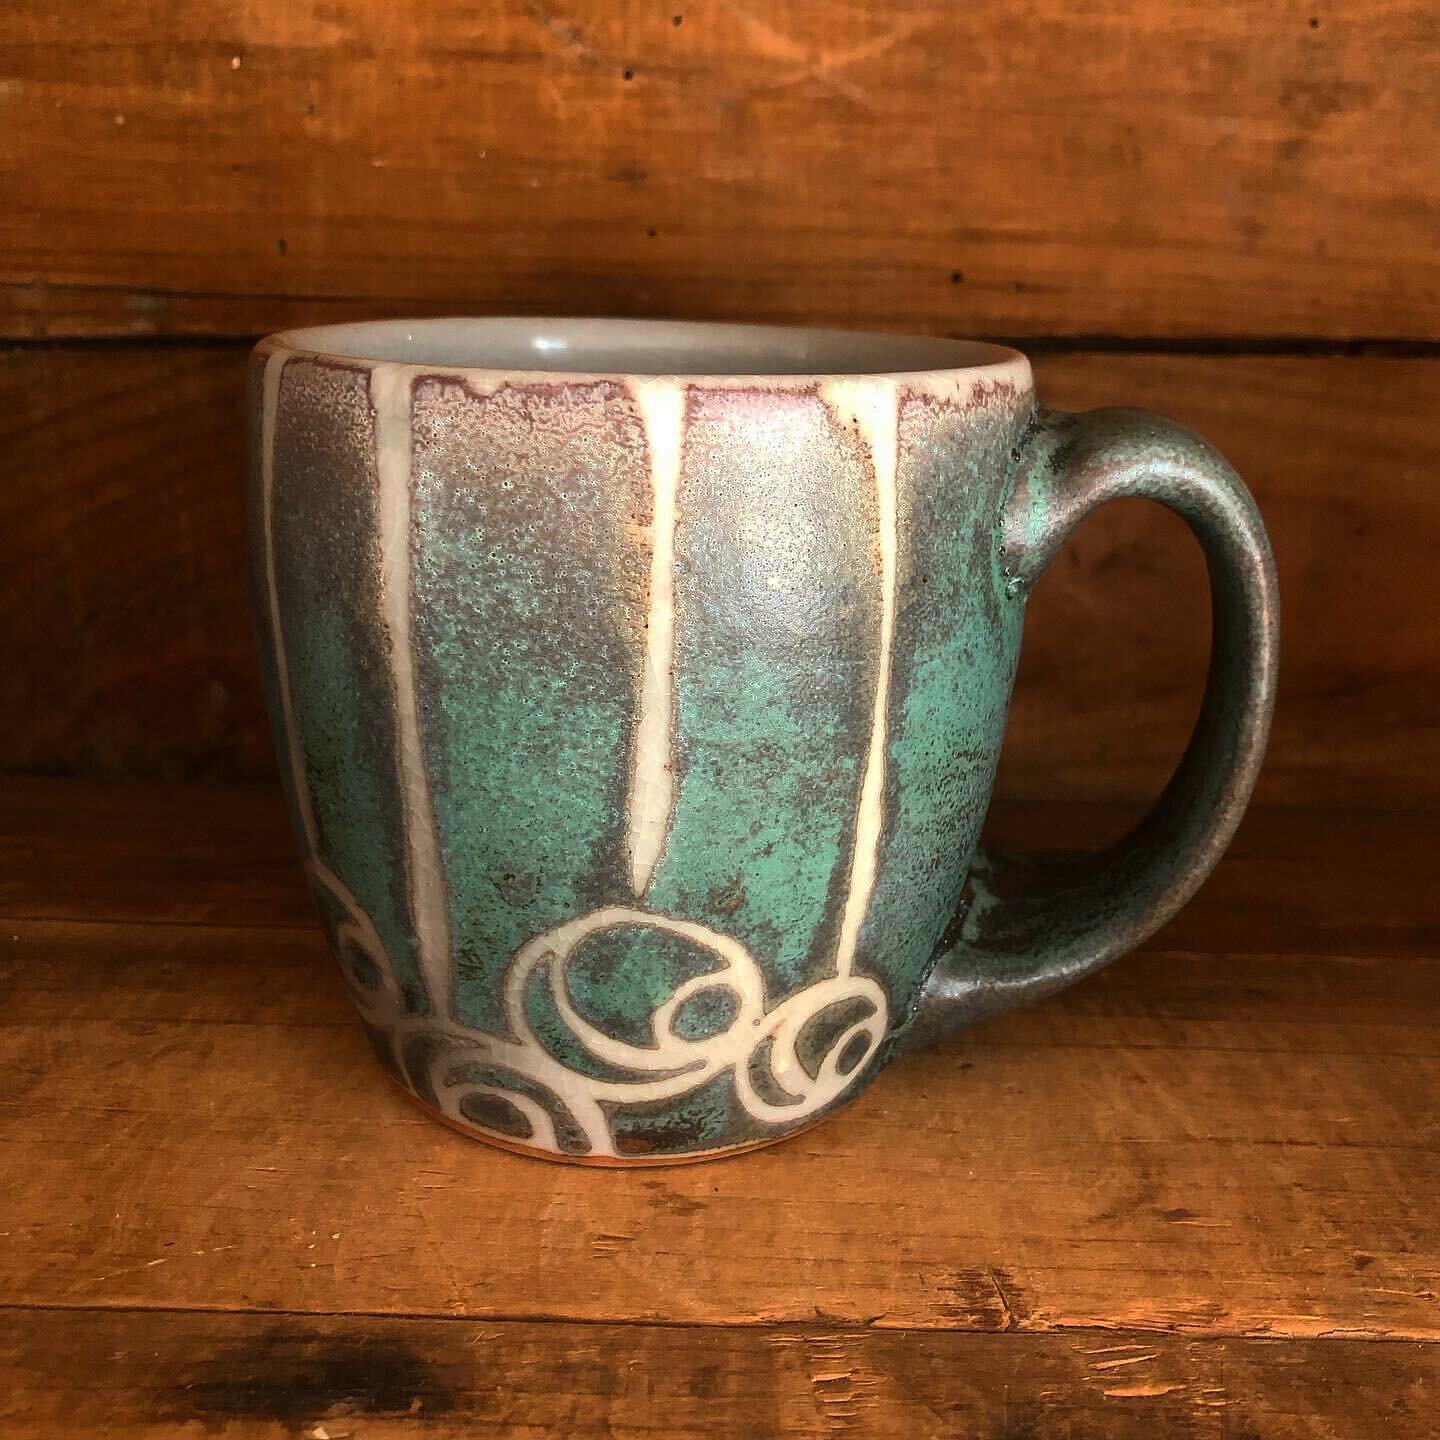 A cozy cappuccino mug ☕️🥰

#ncpottery#keramik#ceramica#joyfulhome#apotterslife#studiopottery#functionalpottery#handmadelife#claylove#claylife#wearethemakers#modernmaker#curatedlife#madeinnc#makermovement#contemporarycraft#contemporarypottery#pottery